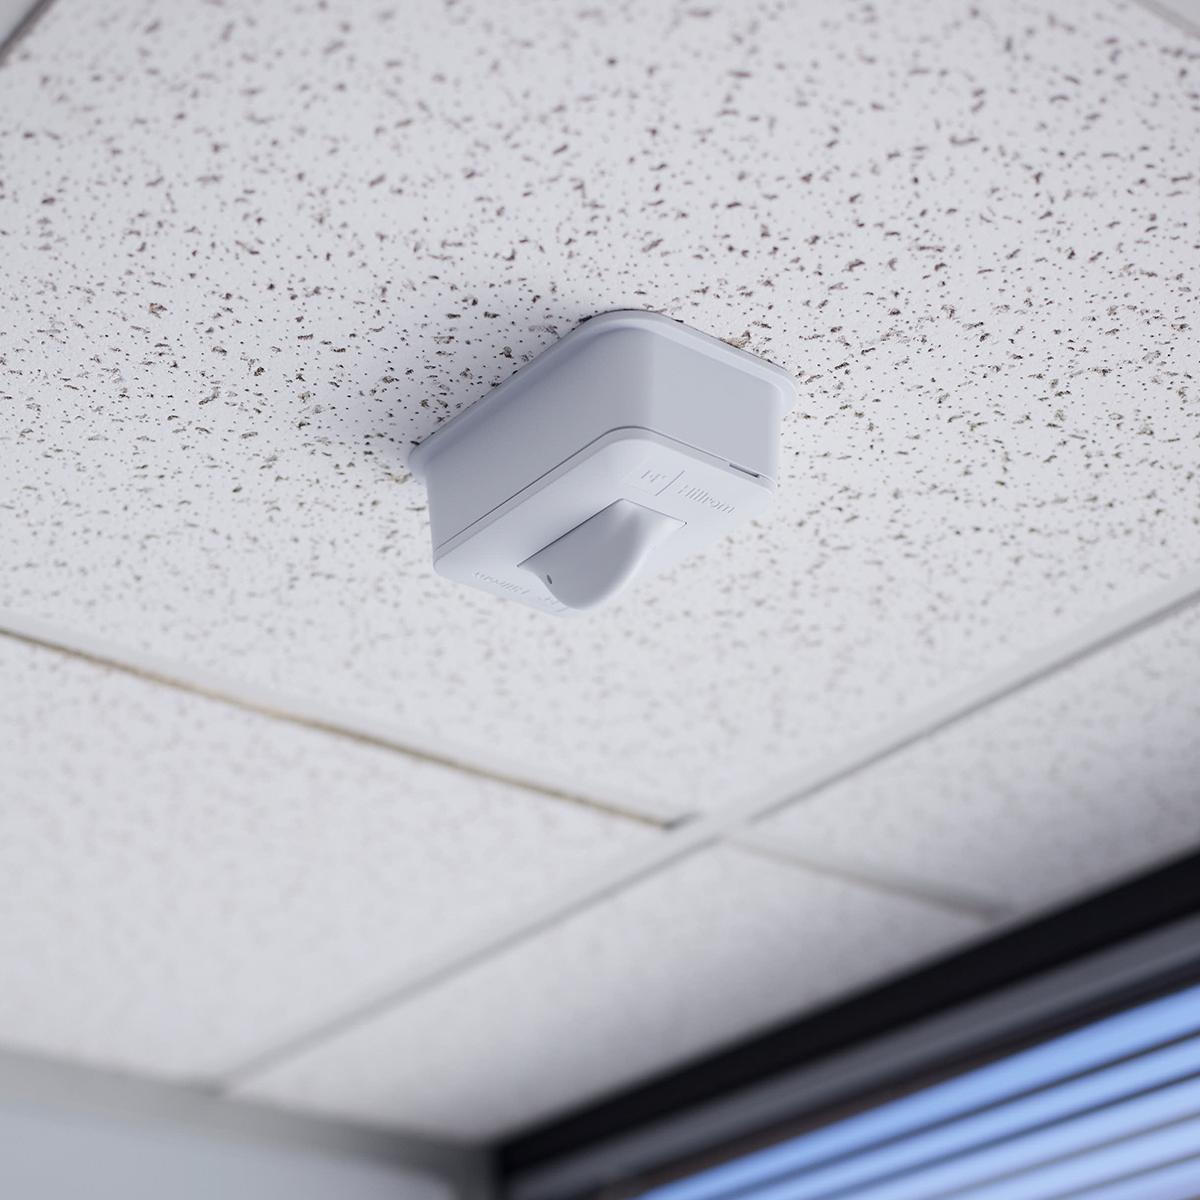 Hillrom Precision Locating uses ceiling anchors installed throughout the area you wish to cover. 